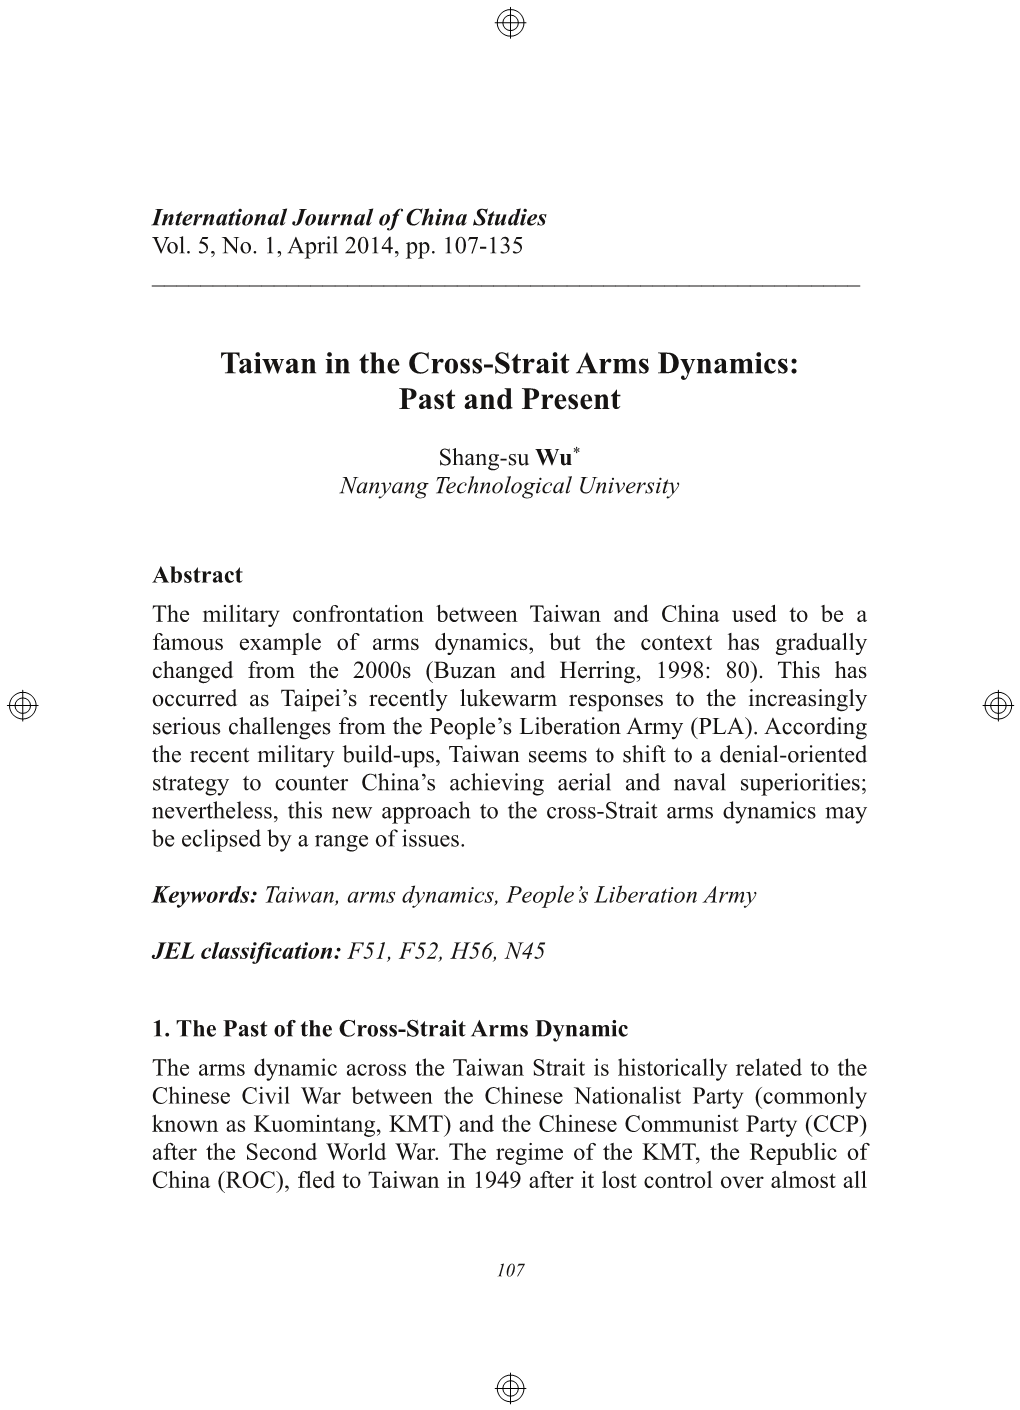 Taiwan in the Crossstrait Arms Dynamics